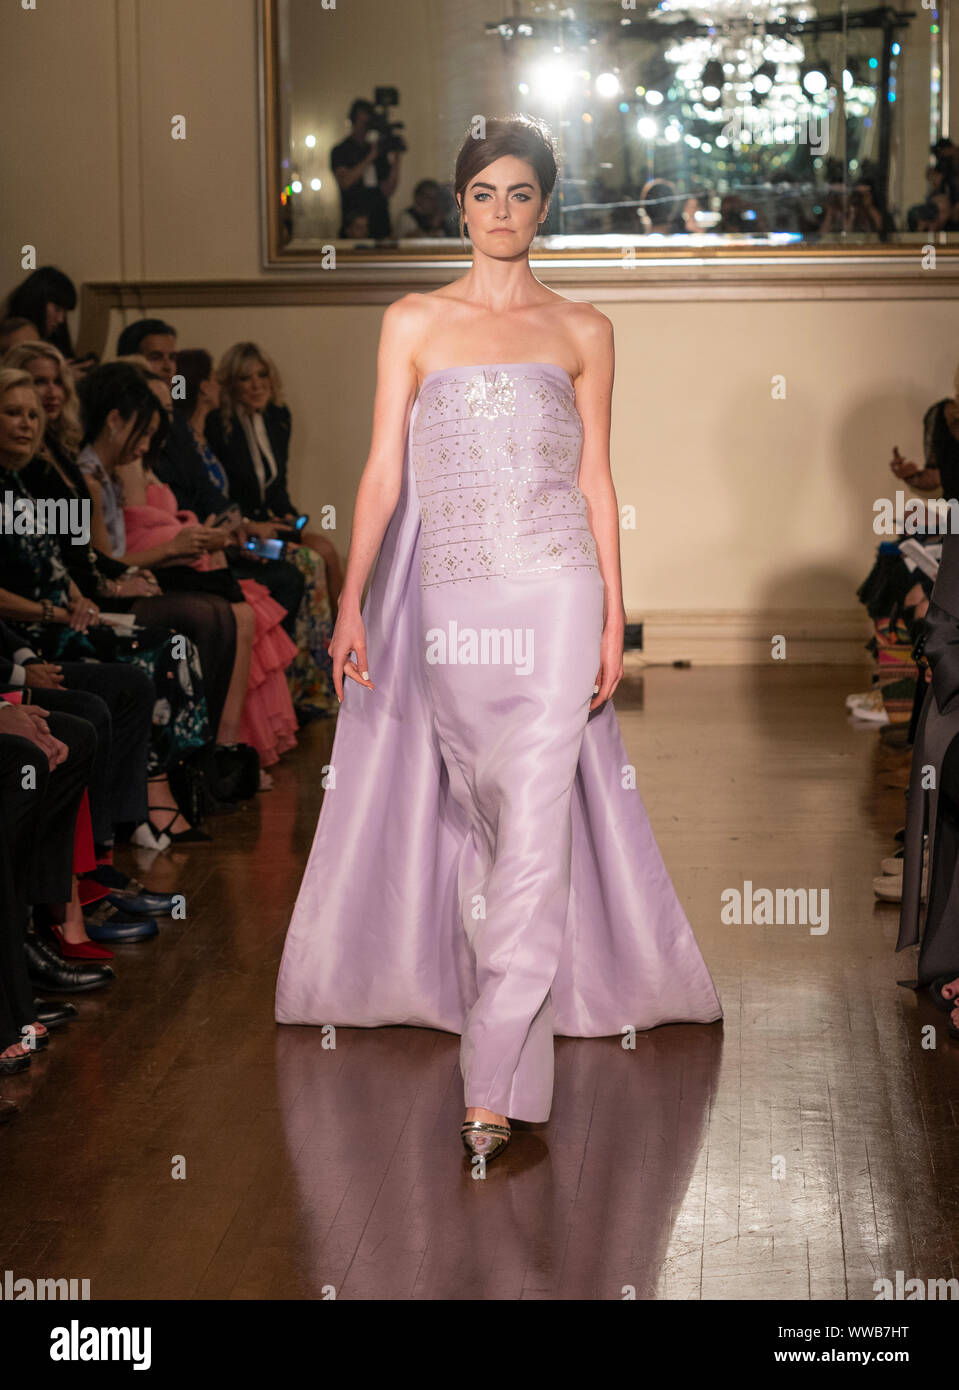 New York, NY - September 10, 2019: Model walks runway for Zang Toi 30th anniversary Spring/Summer 2020 show during fashion week at 3 West Club Stock Photo